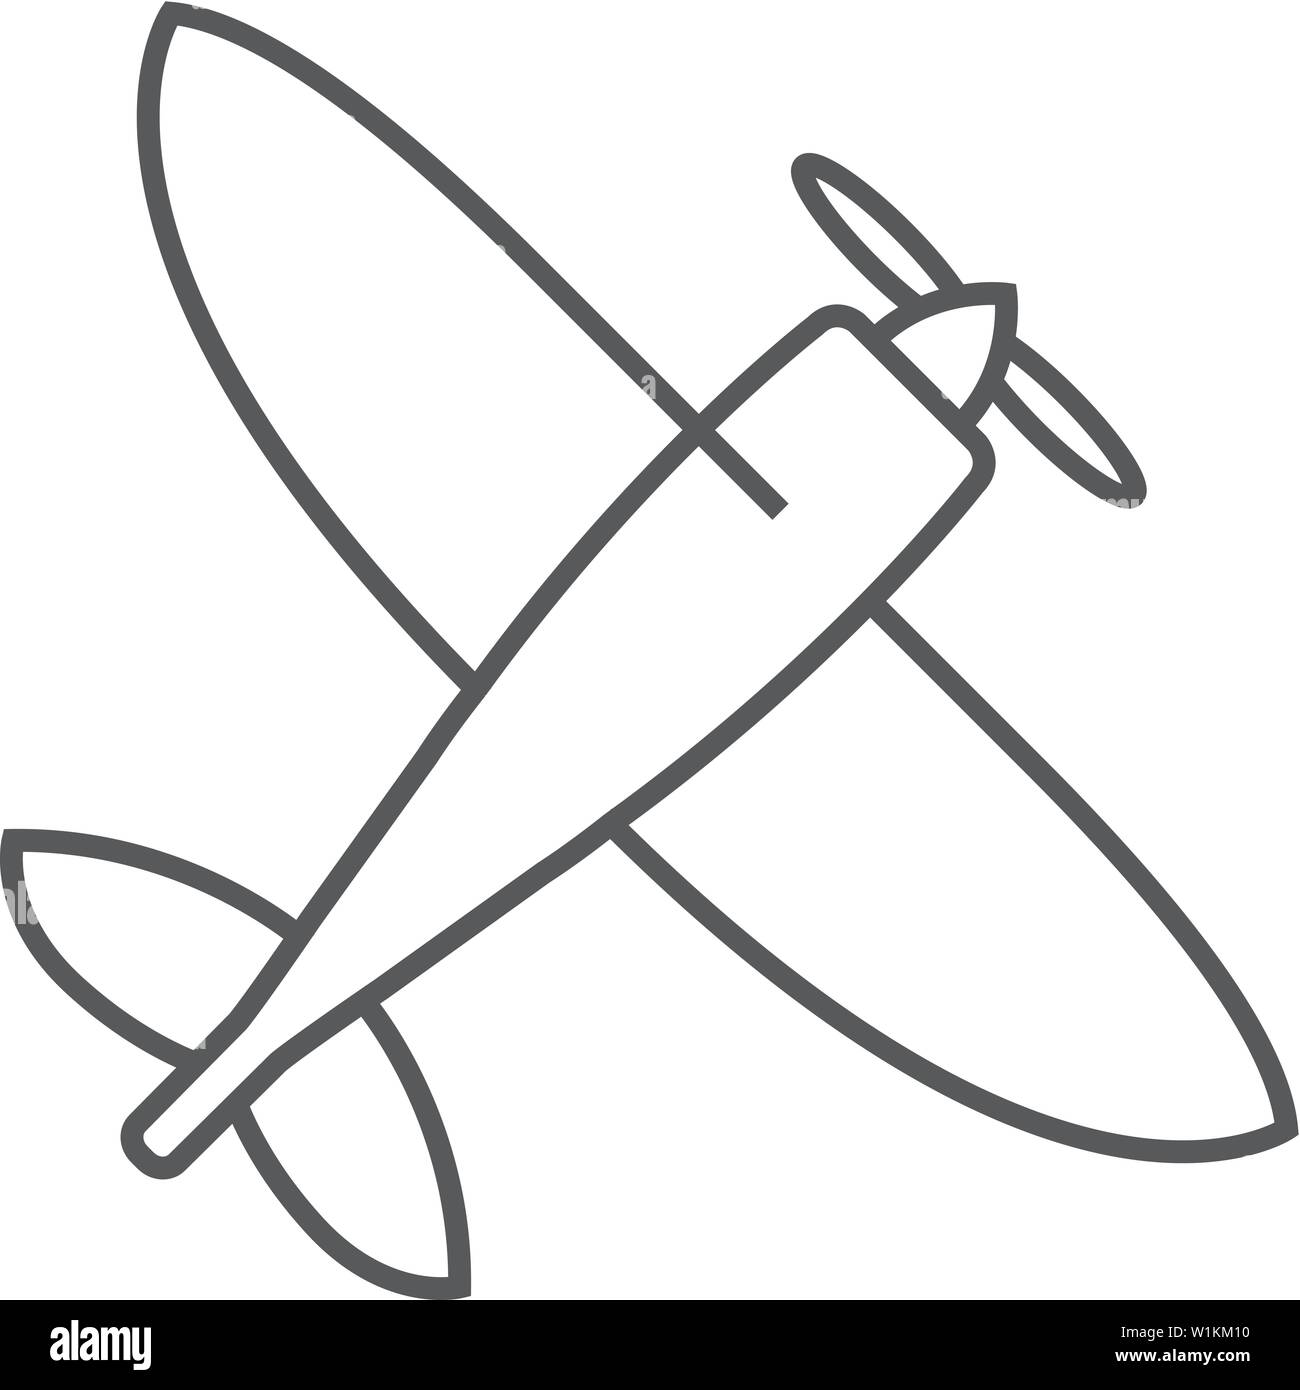 Simple Aeroplane Line Drawing Stock Illustrations – 958 Simple Aeroplane  Line Drawing Stock Illustrations, Vectors & Clipart - Dreamstime